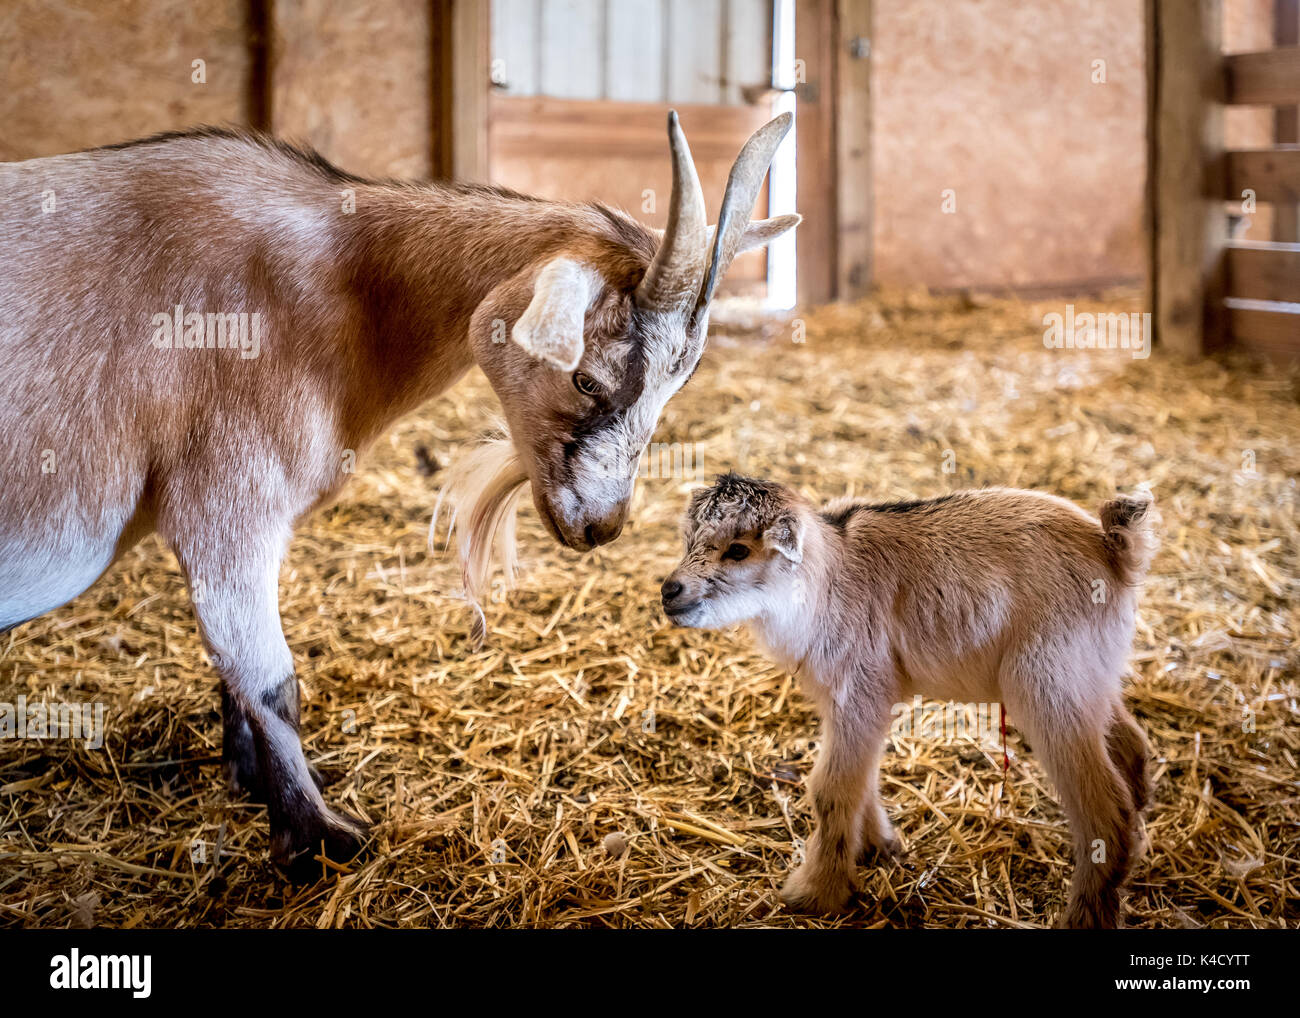 A loving look from mother nanny goat to newborn baby goat, umbilical cord still visible, taking first steps in barn in Oregon's Willamette Valley. Stock Photo